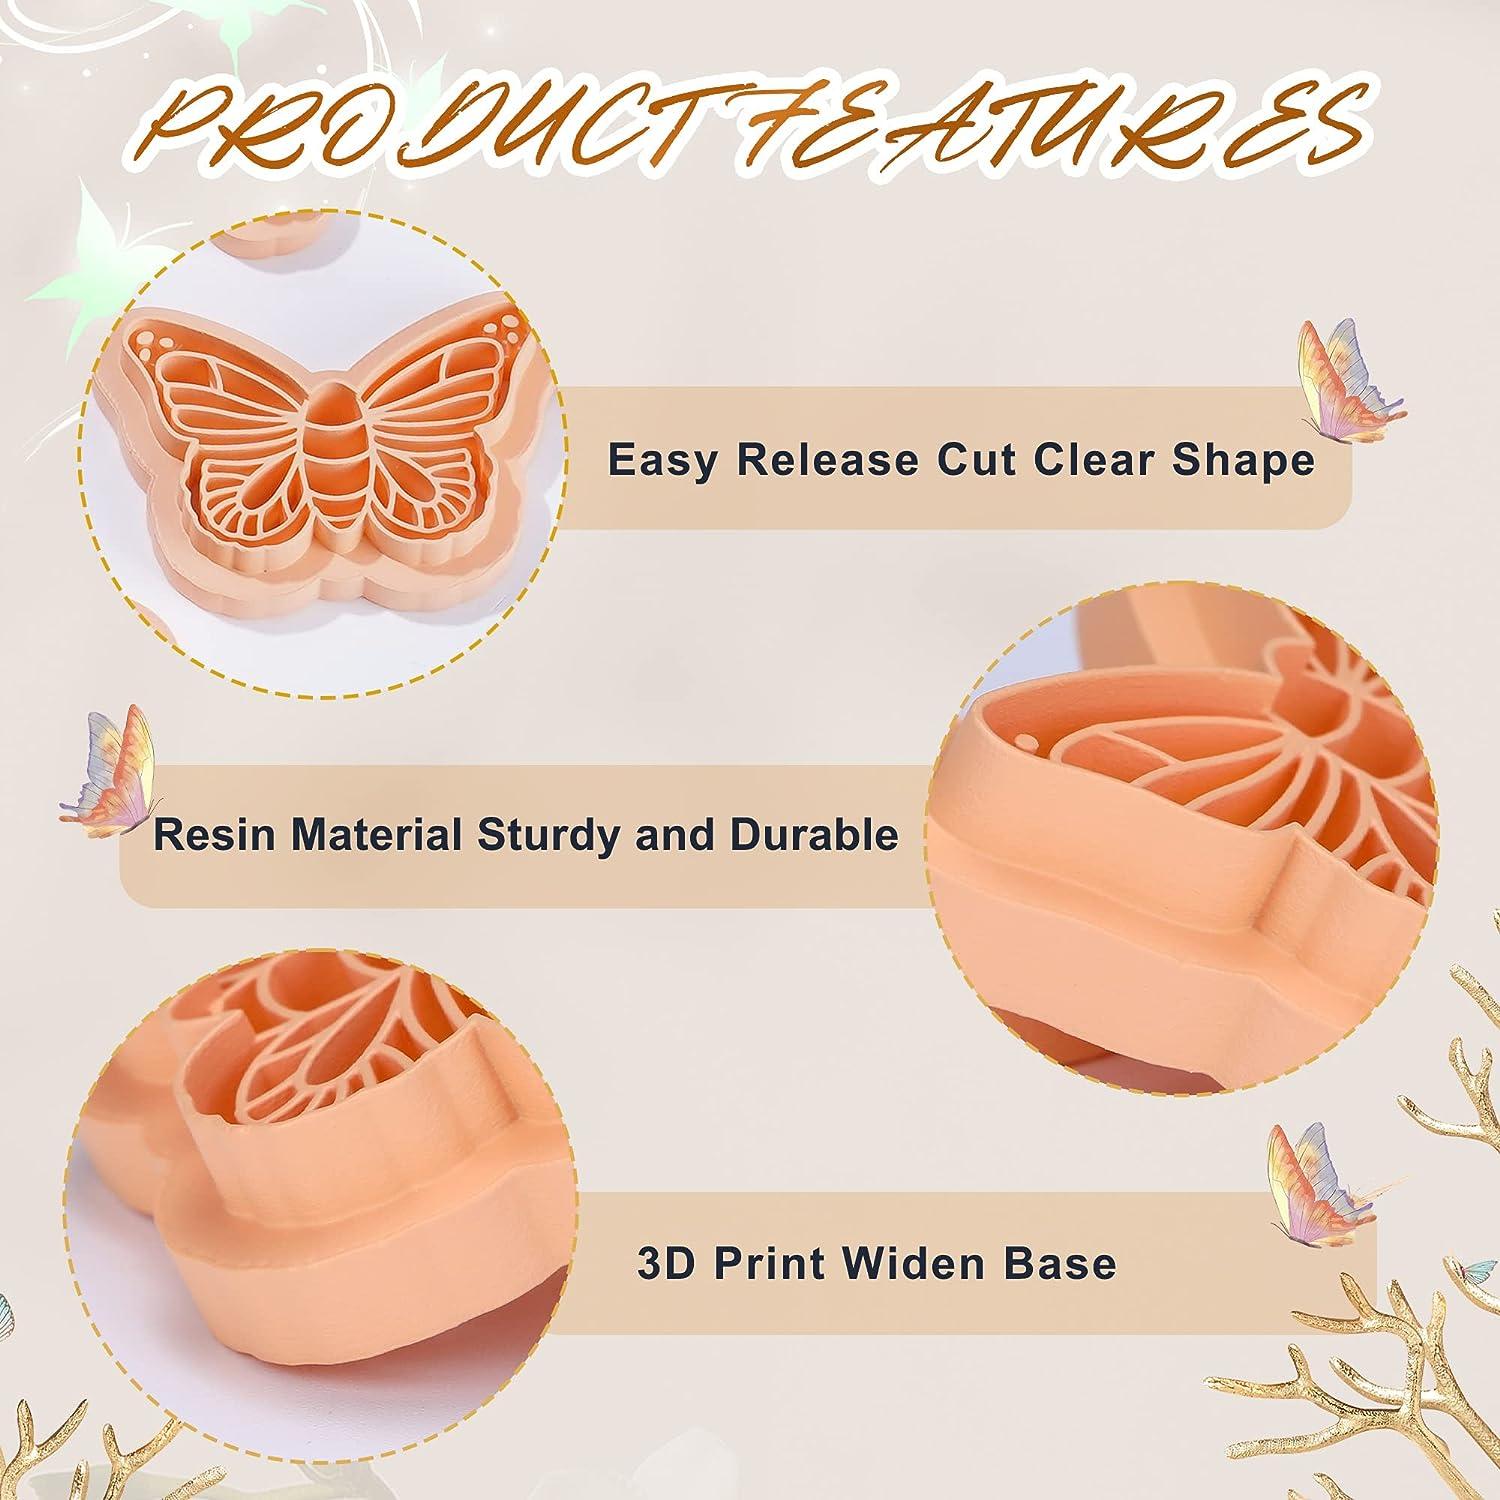 Puocaon Easter Polymer Clay Cutters - 15 Pcs Clay Cutters for Polymer